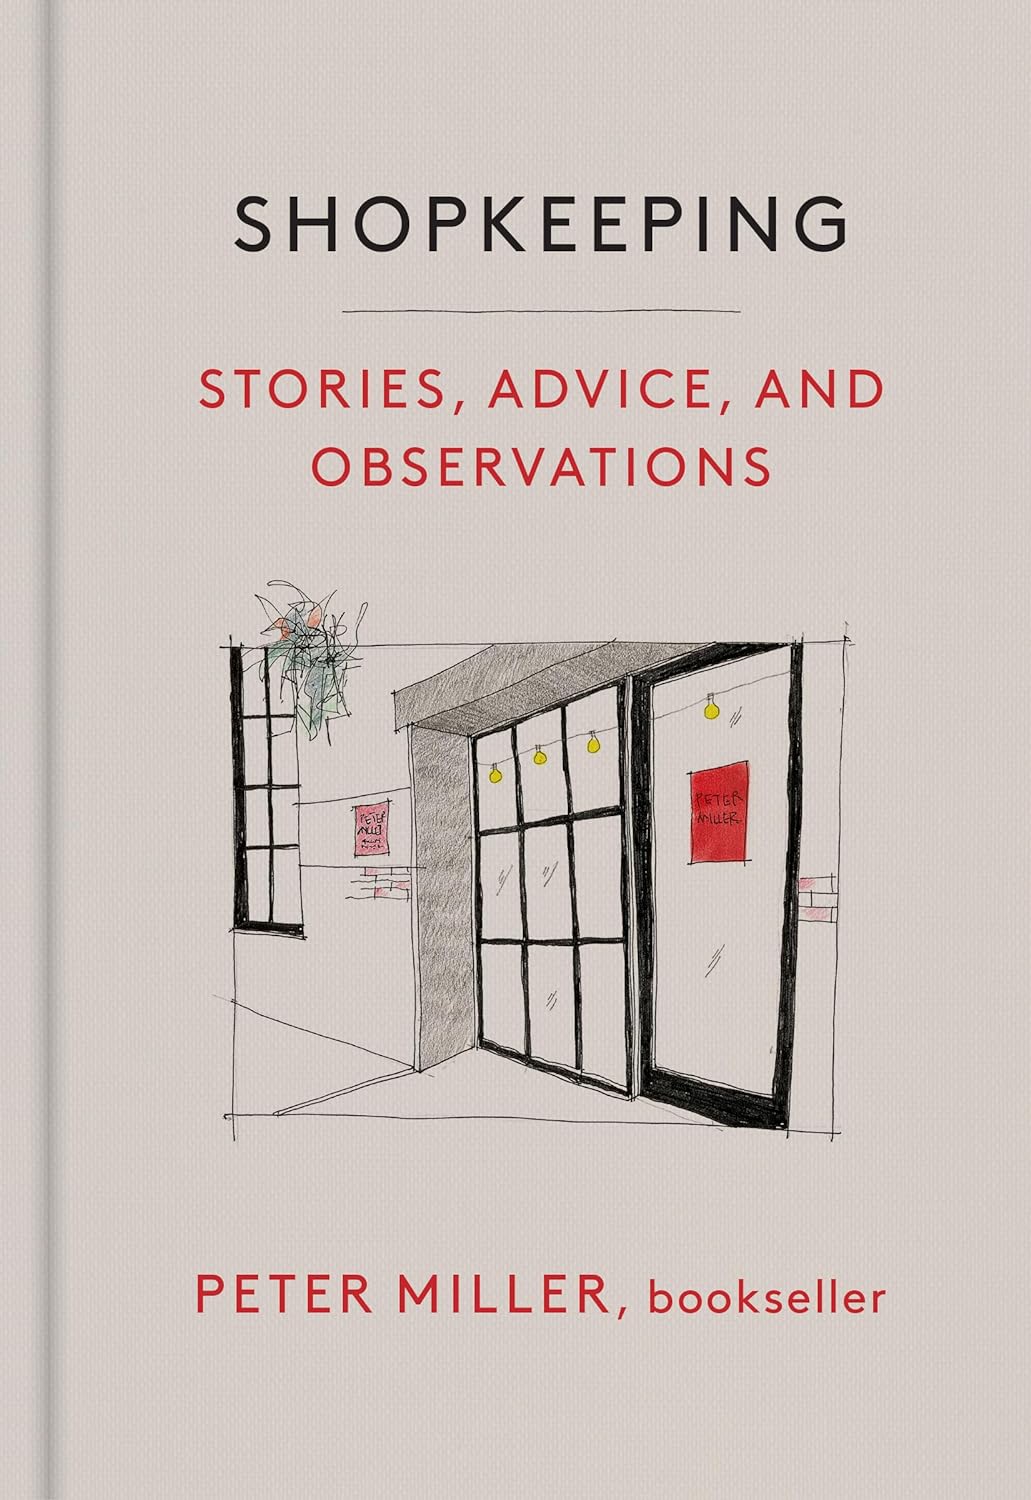 Shopkeeping: Stories, Advice, and Observations